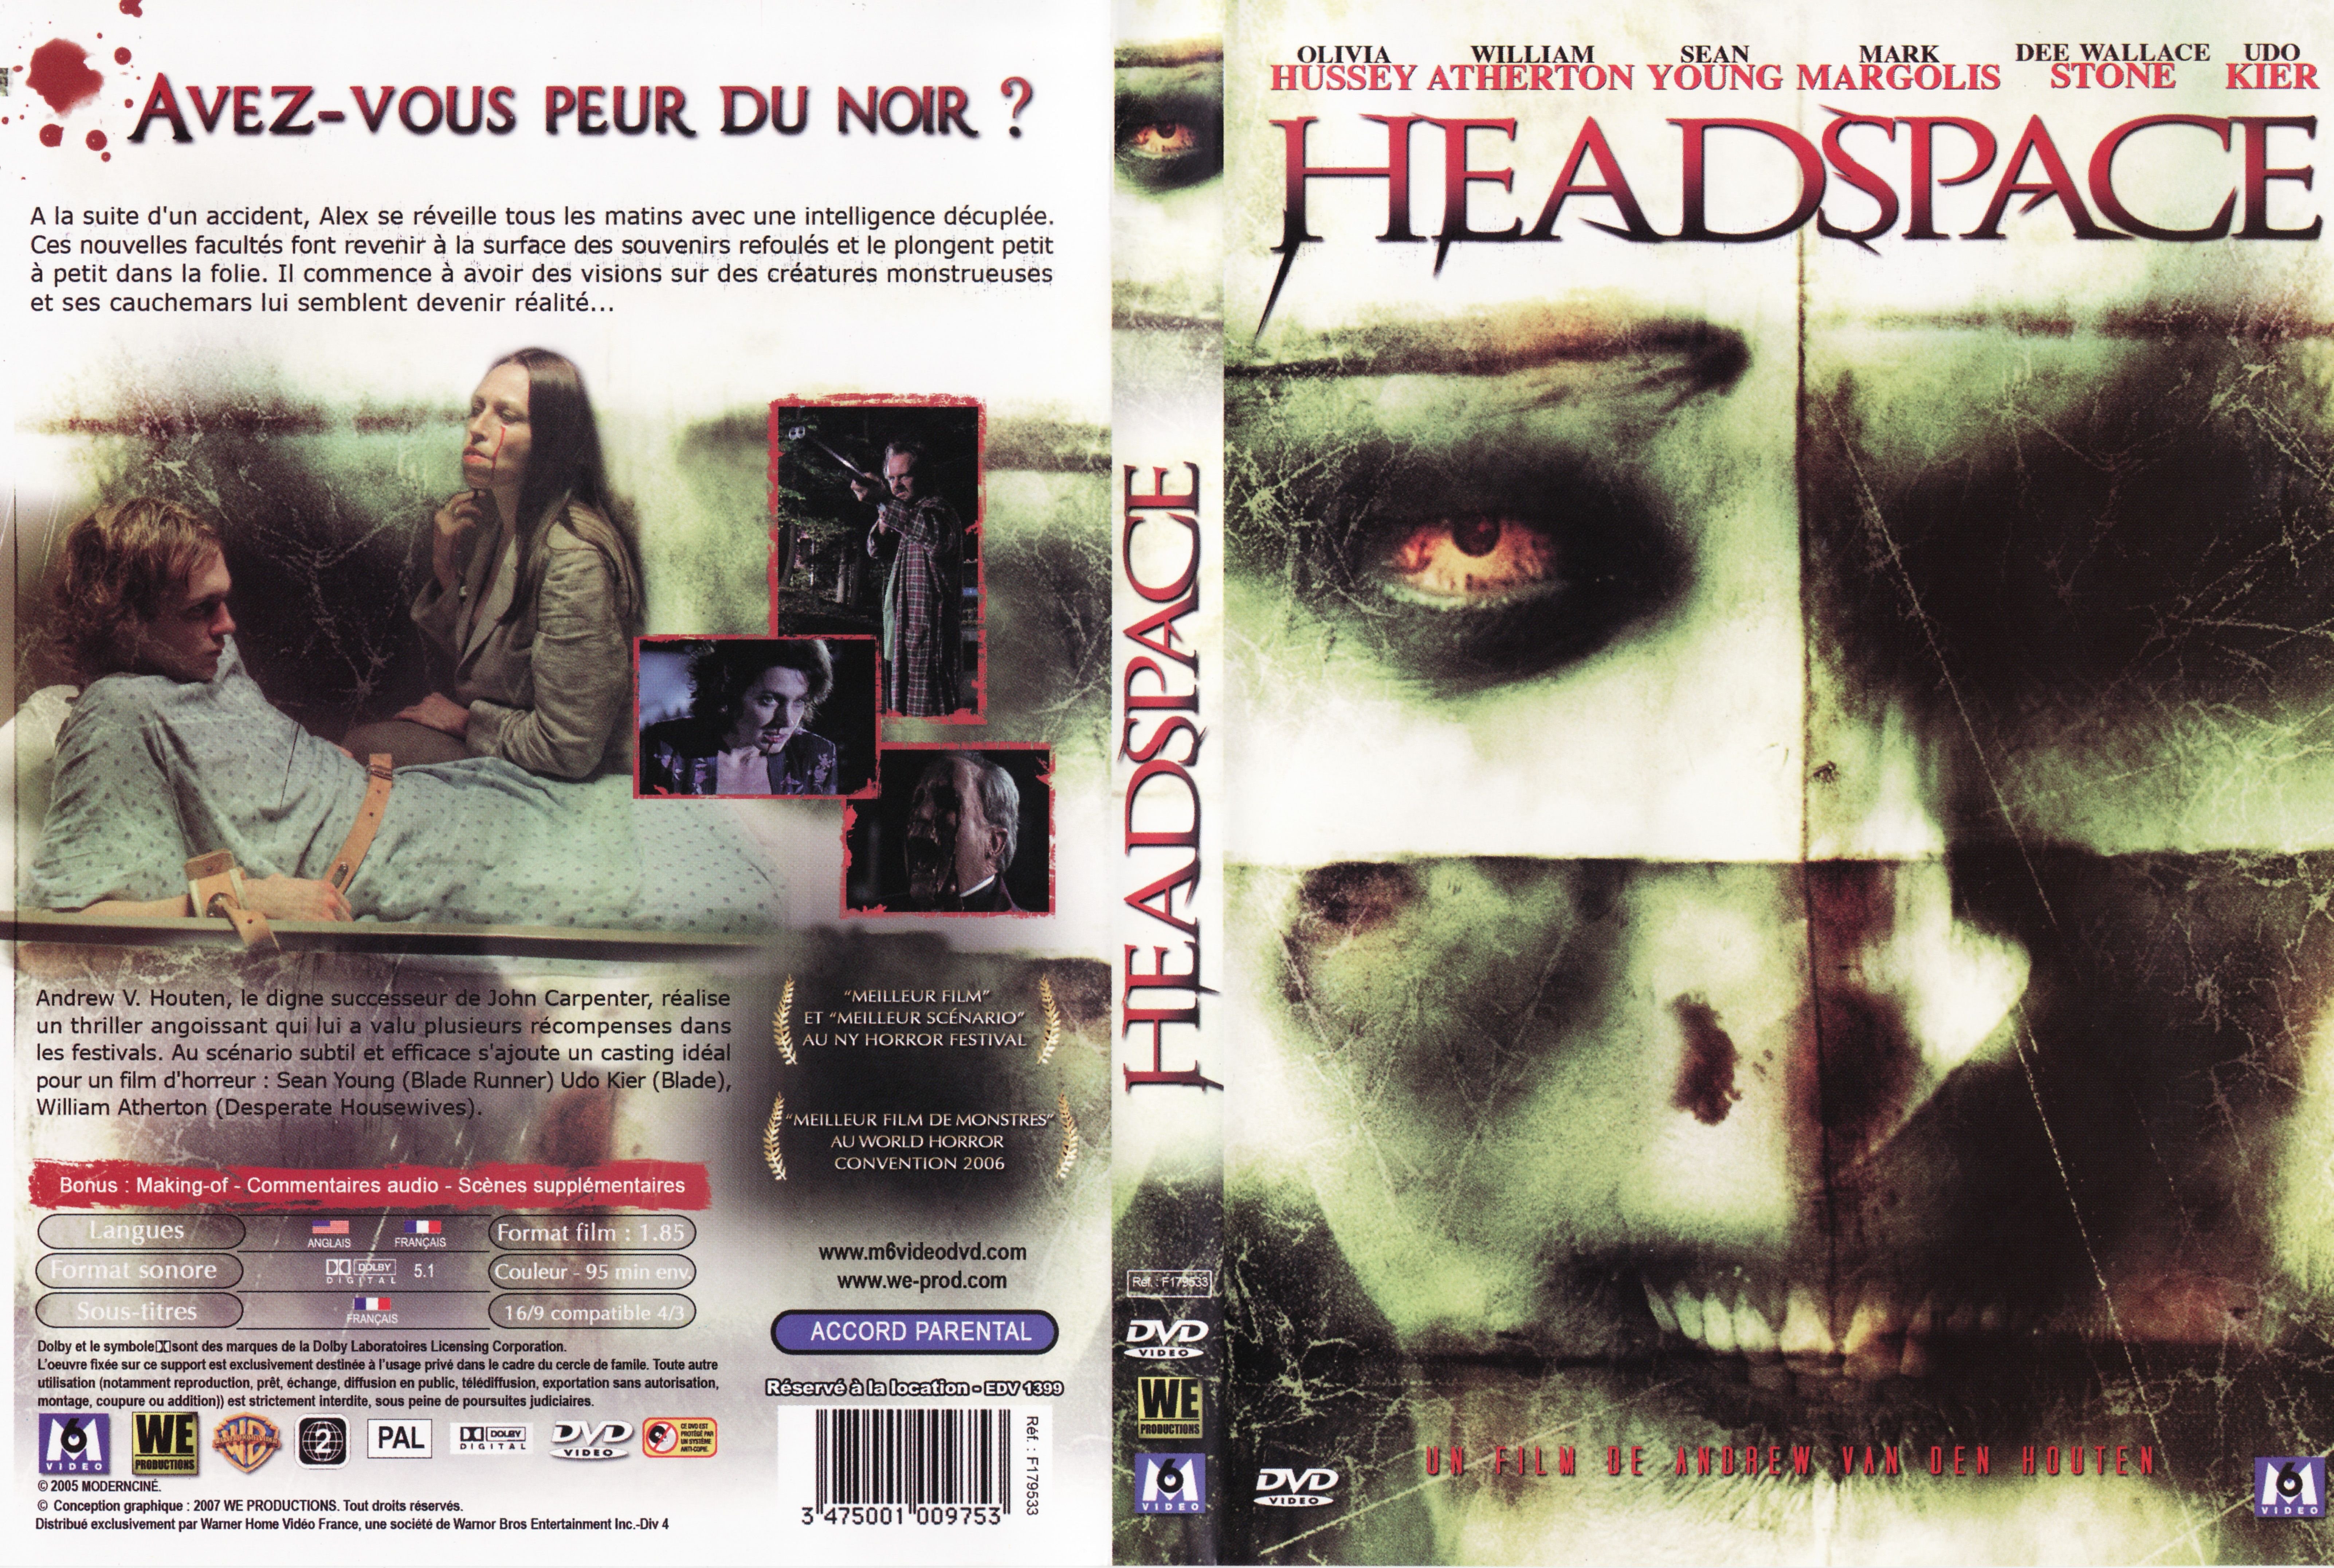 Jaquette DVD Headspace